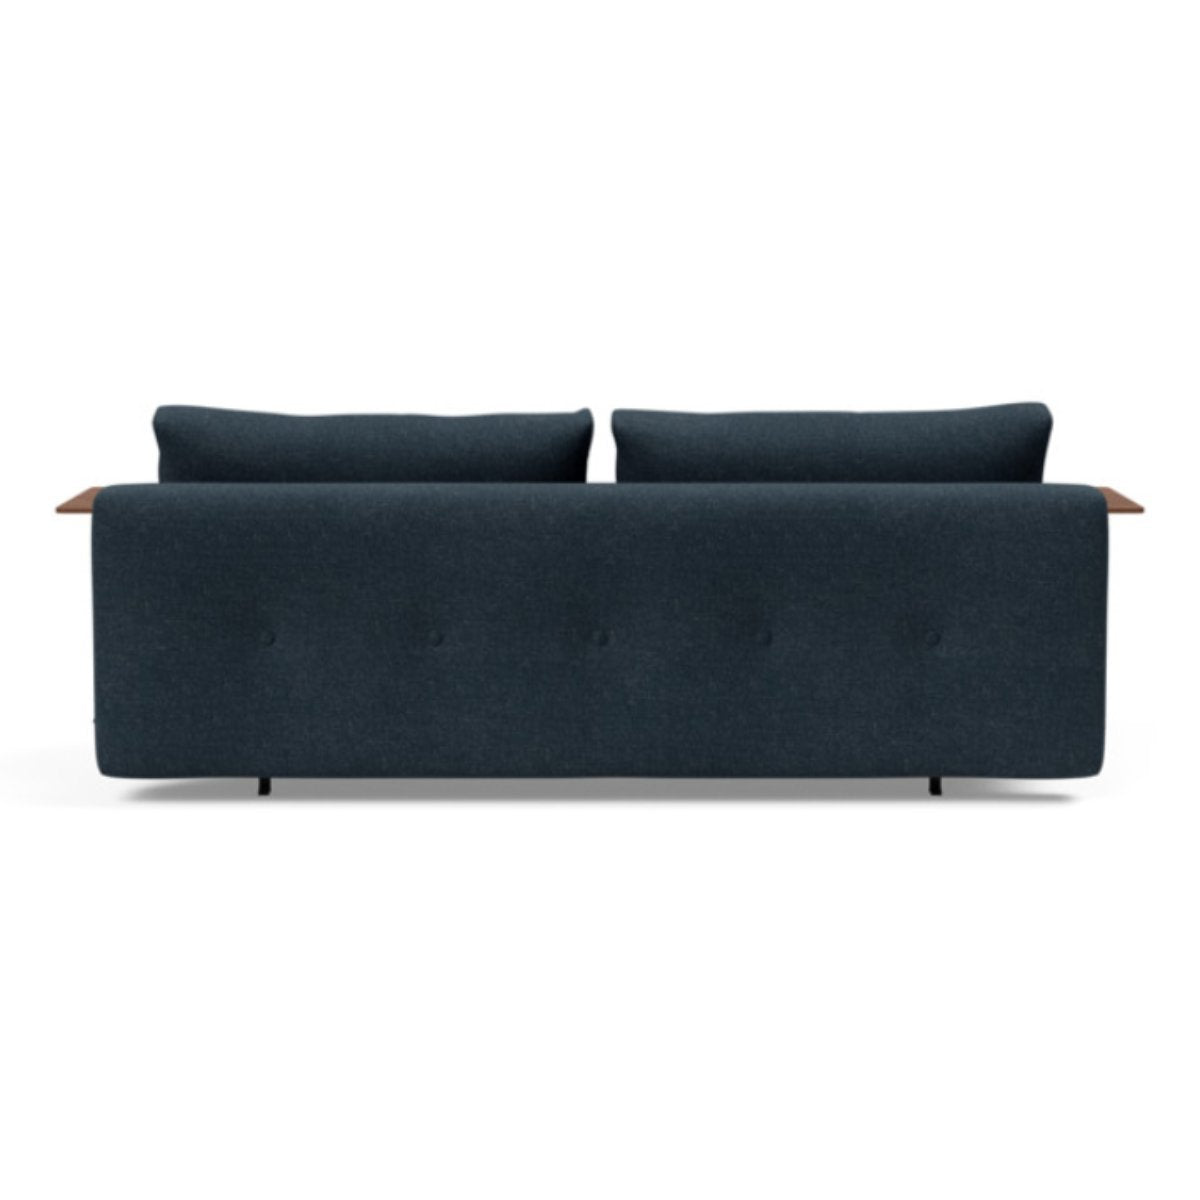 Recast Plus Sofa Bed Dark Styletto With Arms Daybed INNOVATION     Four Hands, Burke Decor, Mid Century Modern Furniture, Old Bones Furniture Company, Old Bones Co, Modern Mid Century, Designer Furniture, https://www.oldbonesco.com/